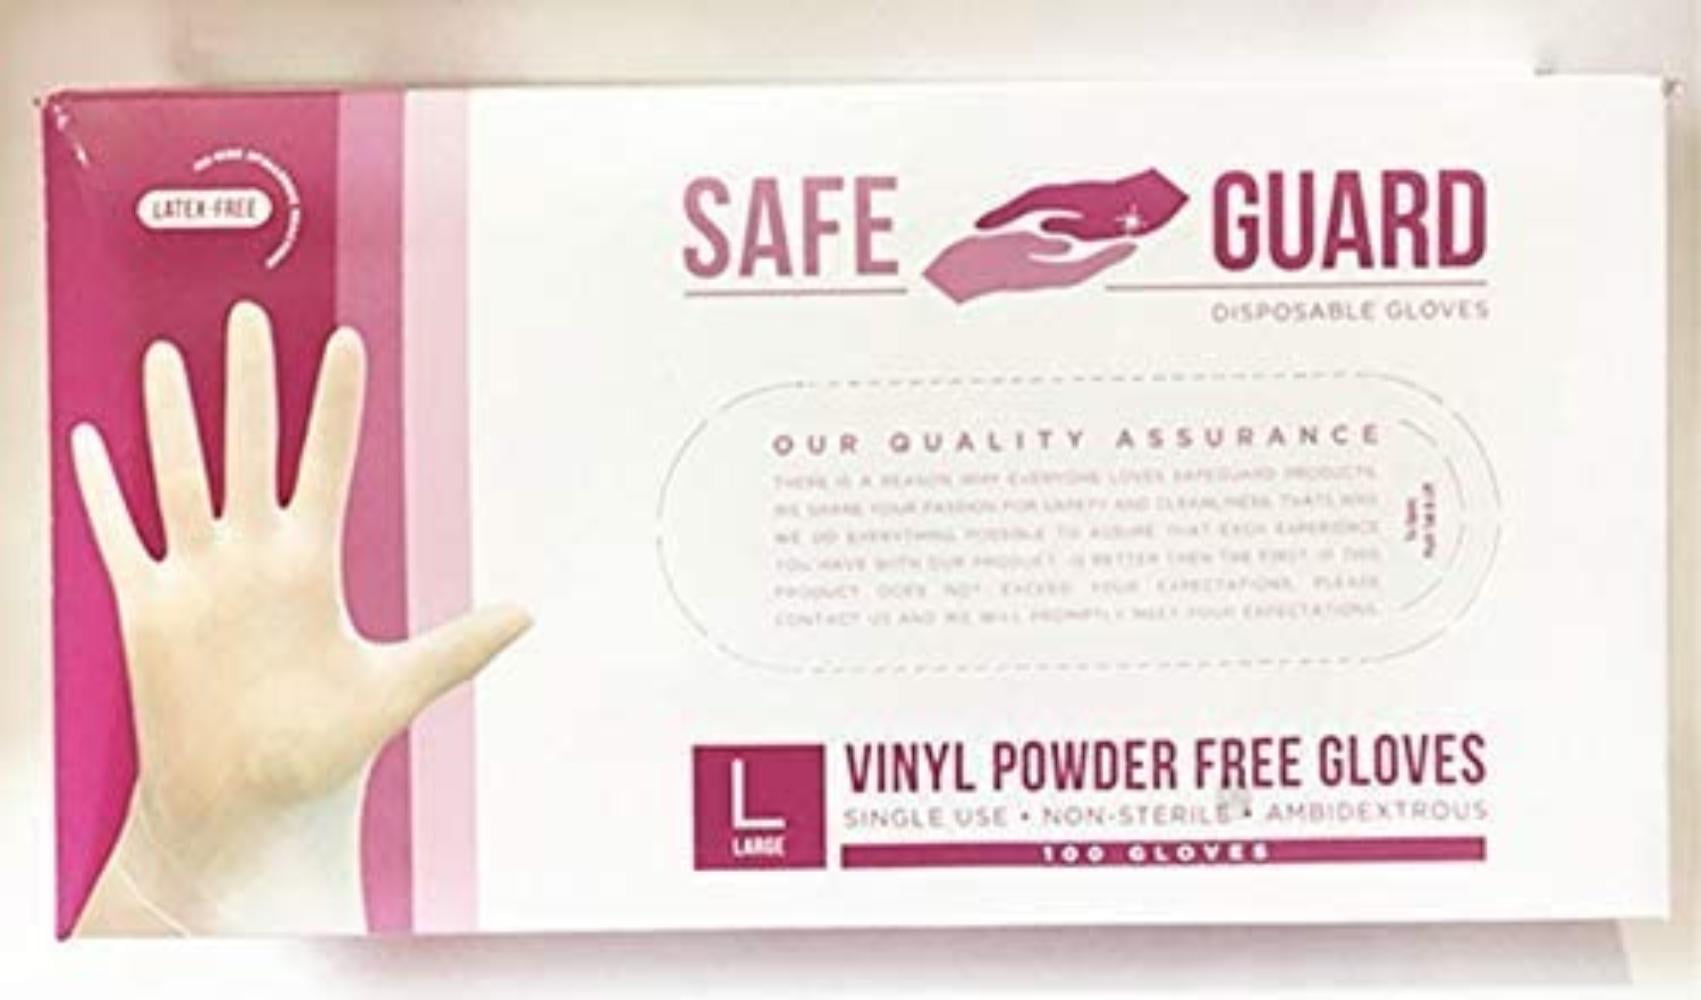 Safeguard Latex Powder Free Gloves Small large X-large 100 Count Medium 